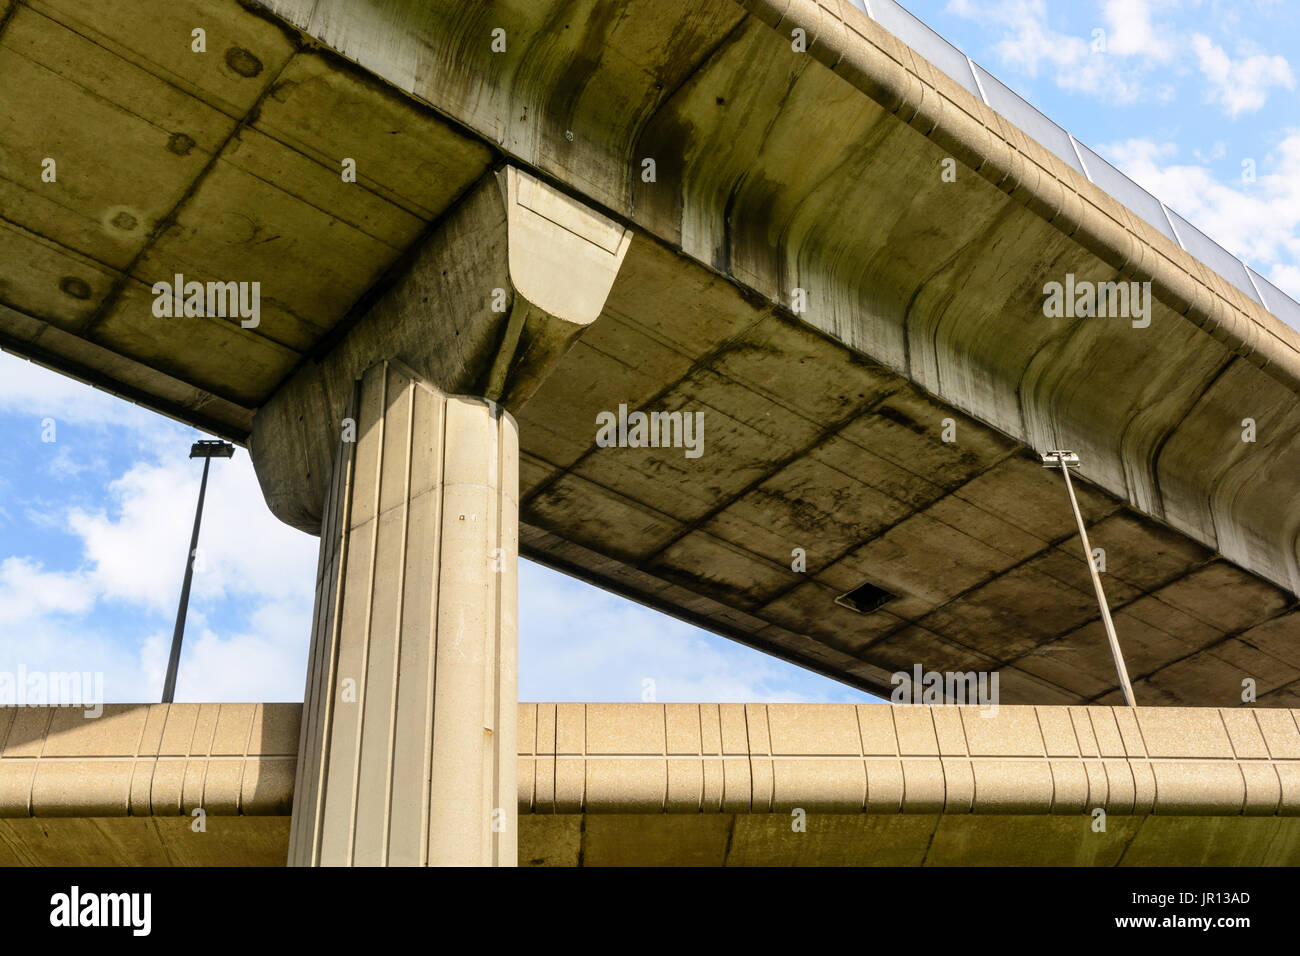 View from below of two highway junctions crossing one above the other. Stock Photo